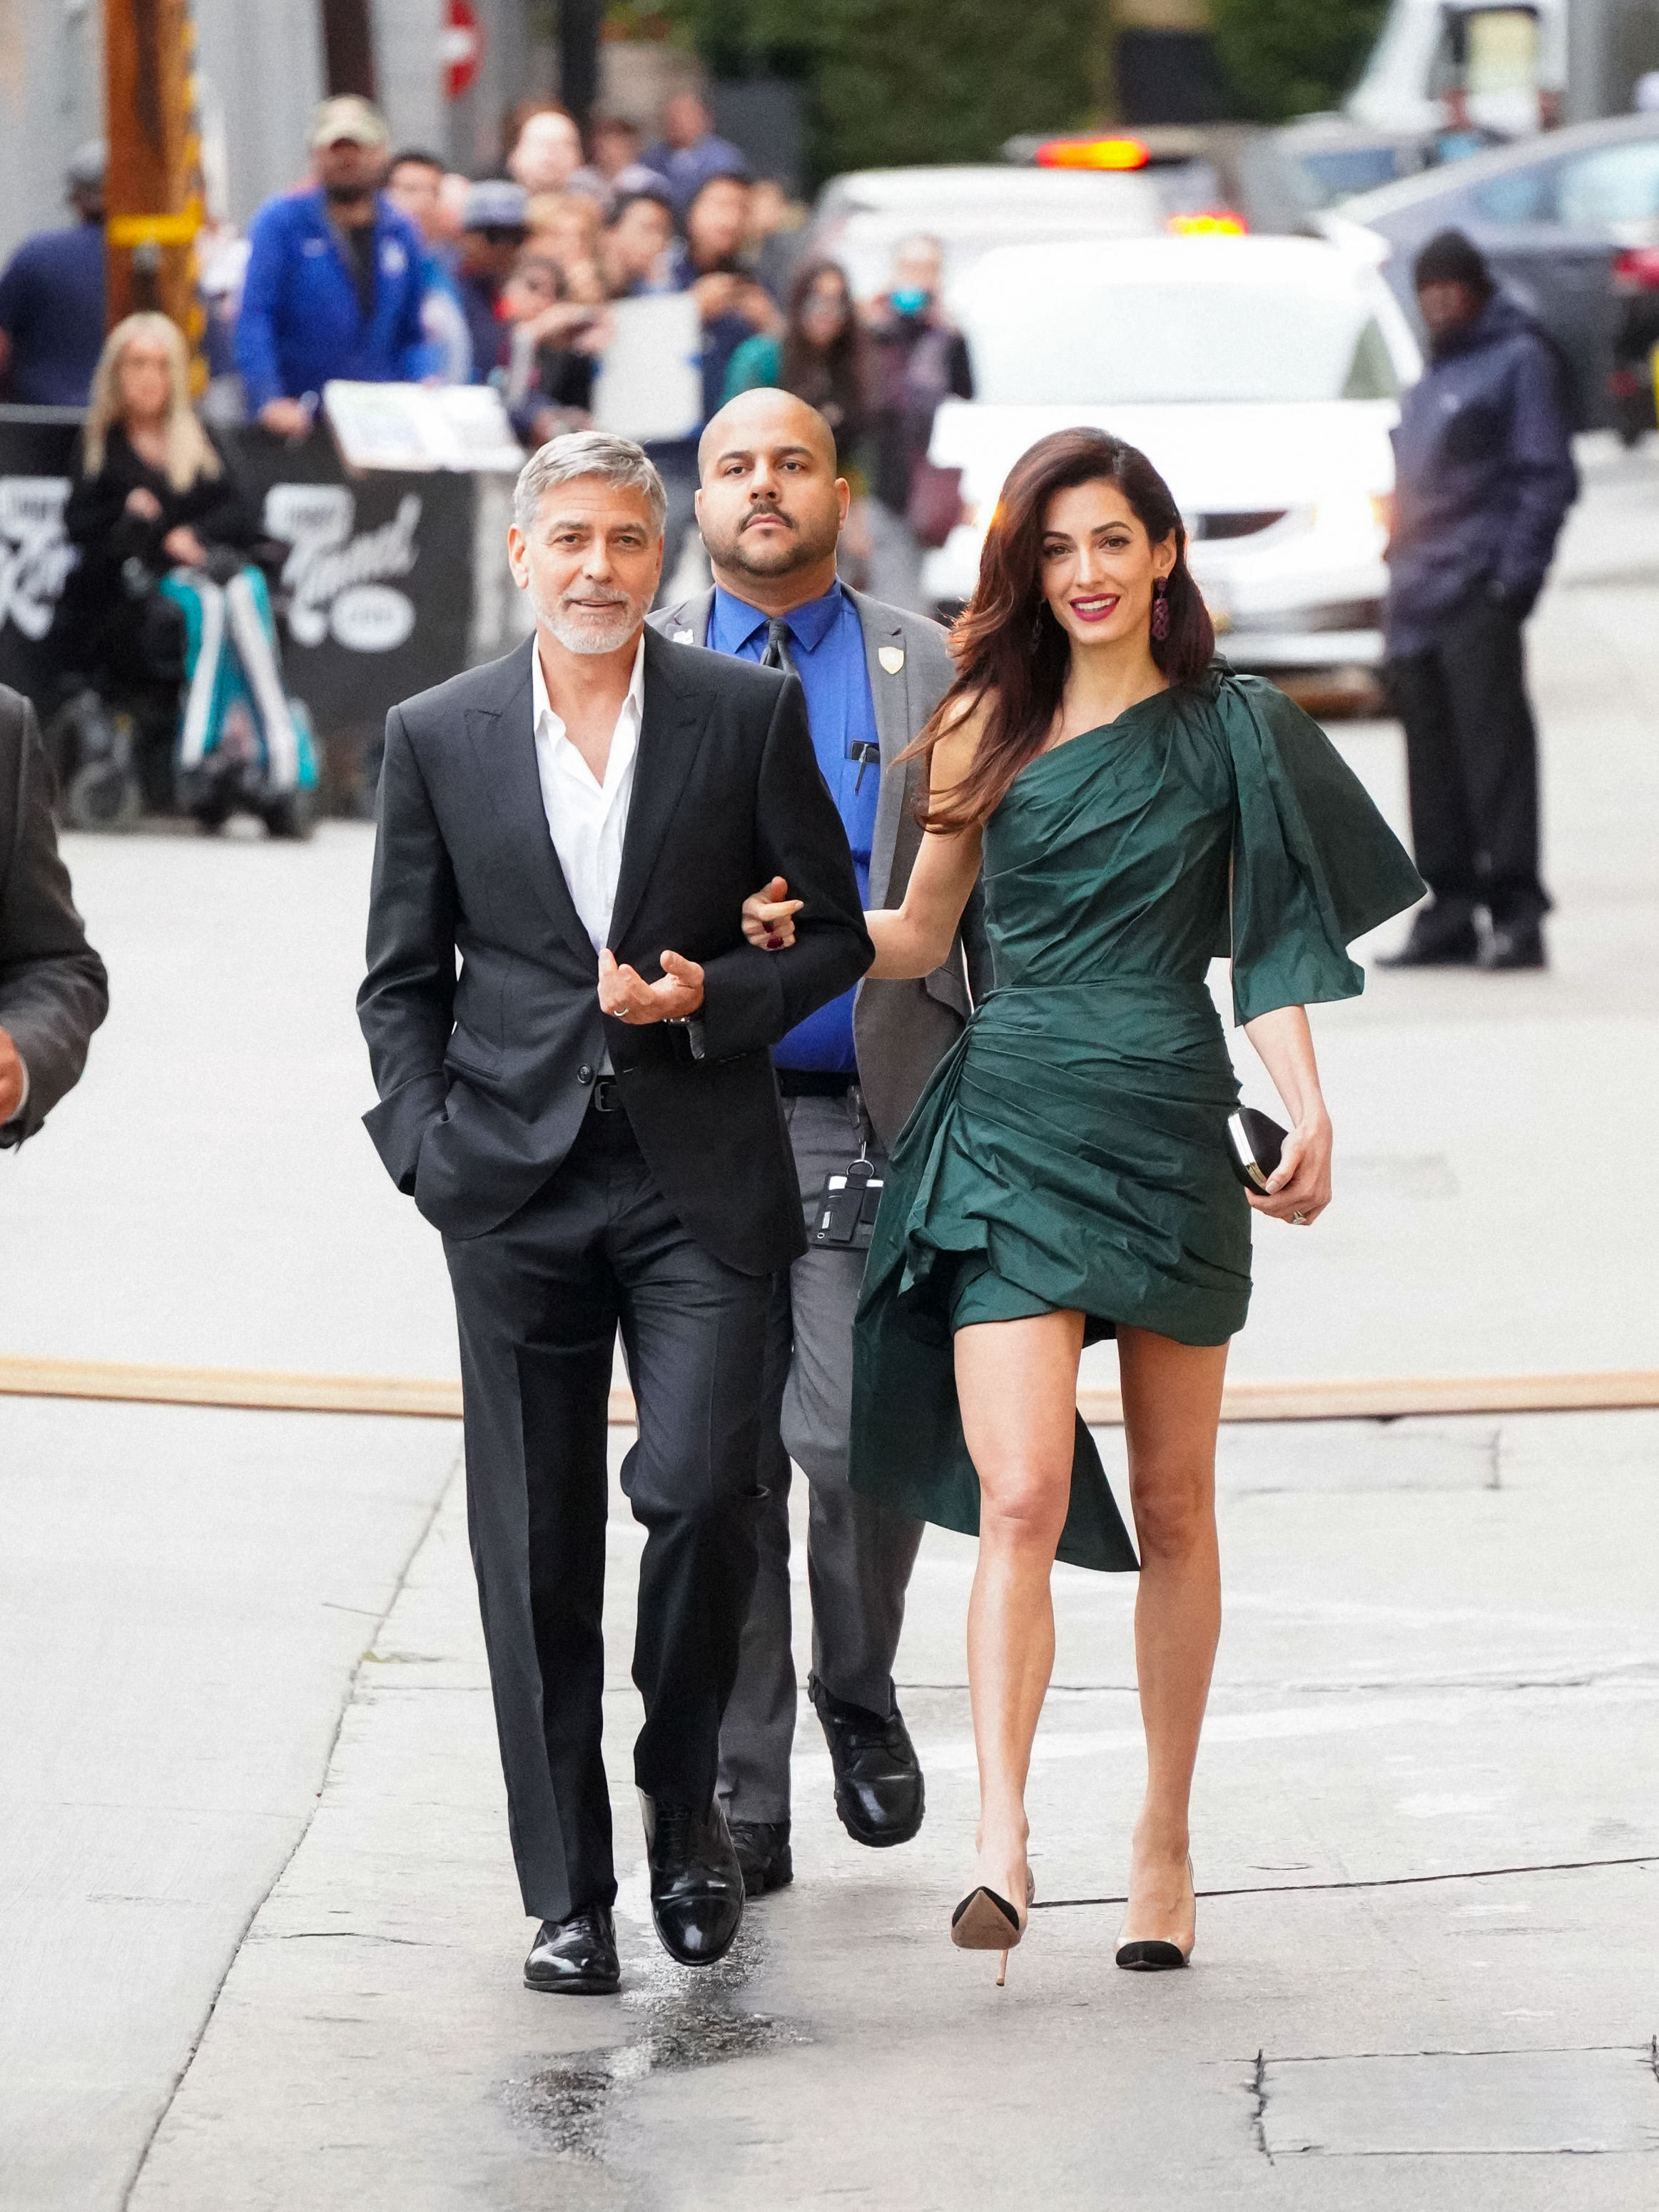 George Clooney and Amal Clooney pictured arriving at "Jimmy Kimmel Live" on May 7, 2019 in Los Angeles, California | Source: Getty Images